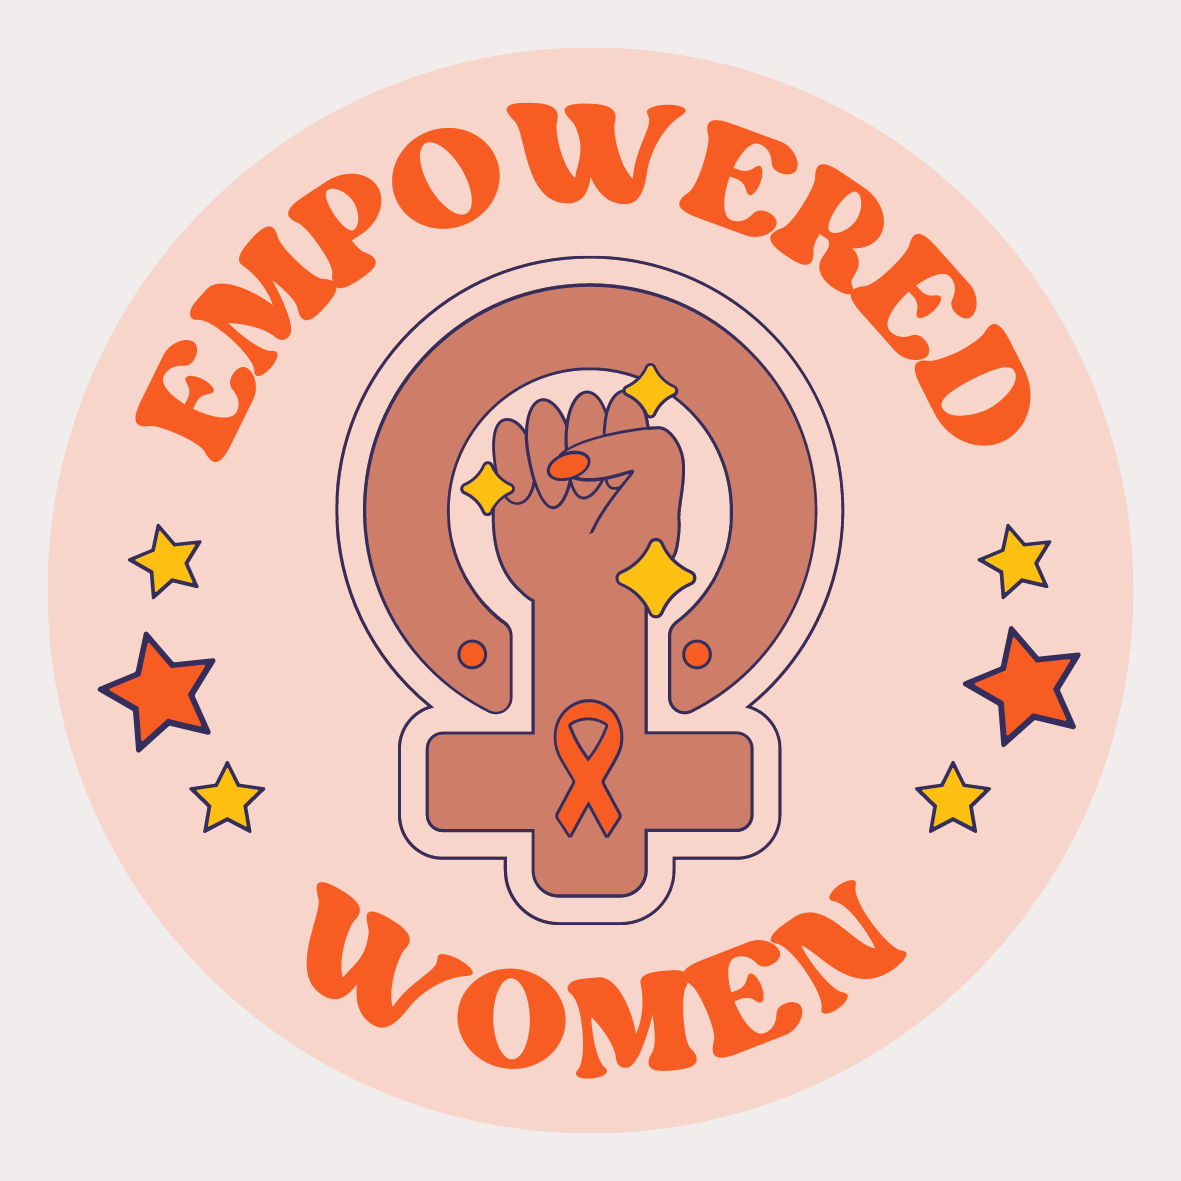 Empowered Woman Candle